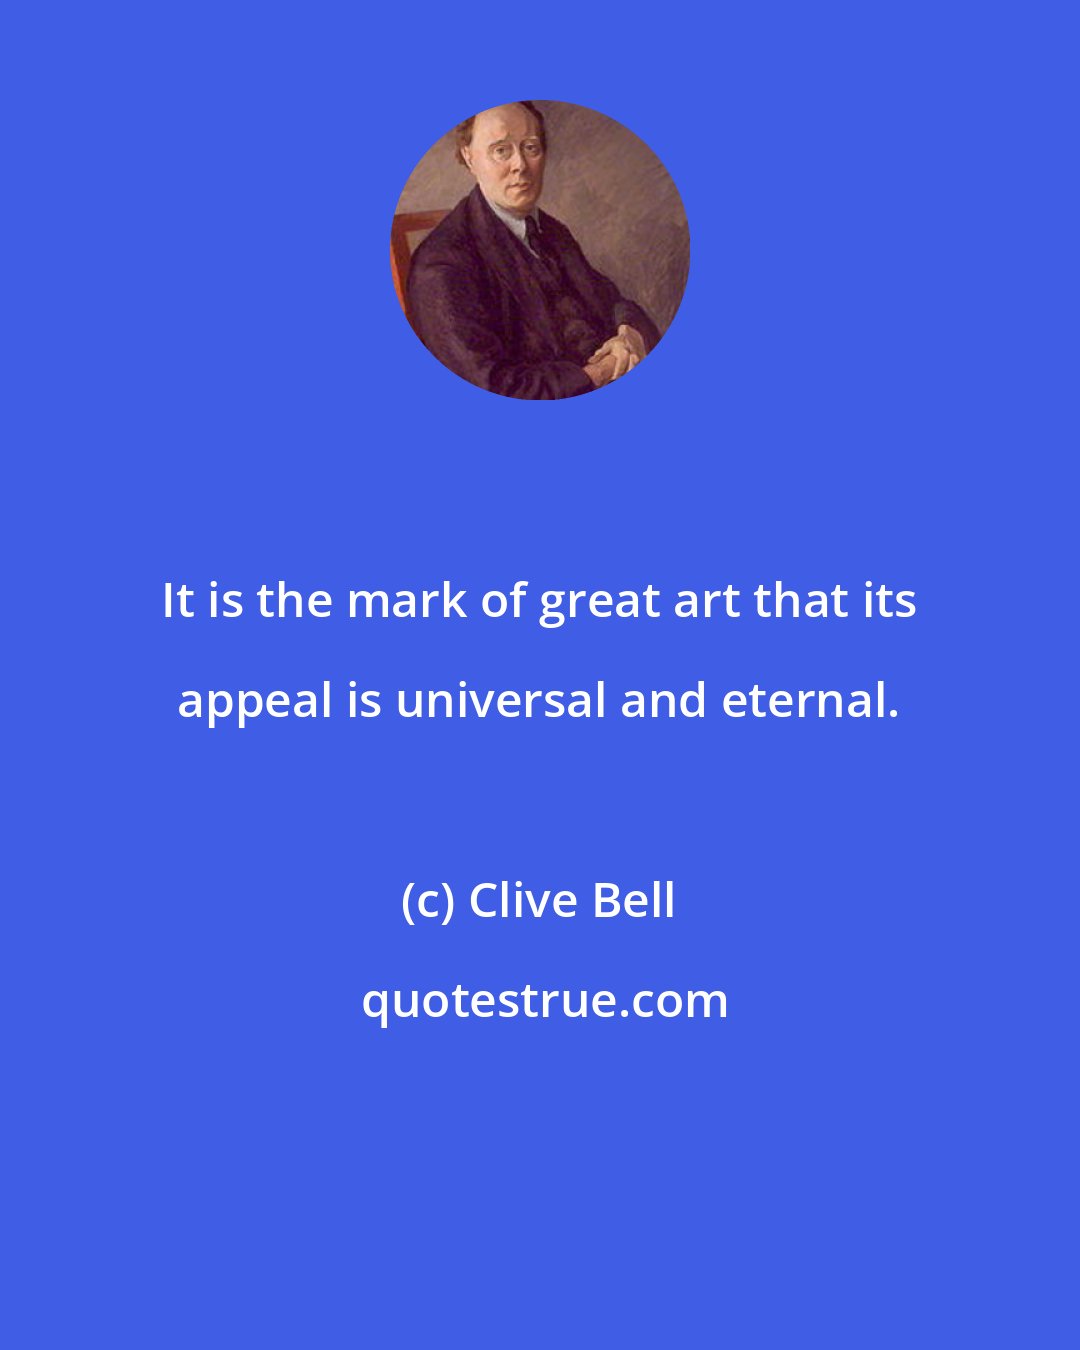 Clive Bell: It is the mark of great art that its appeal is universal and eternal.